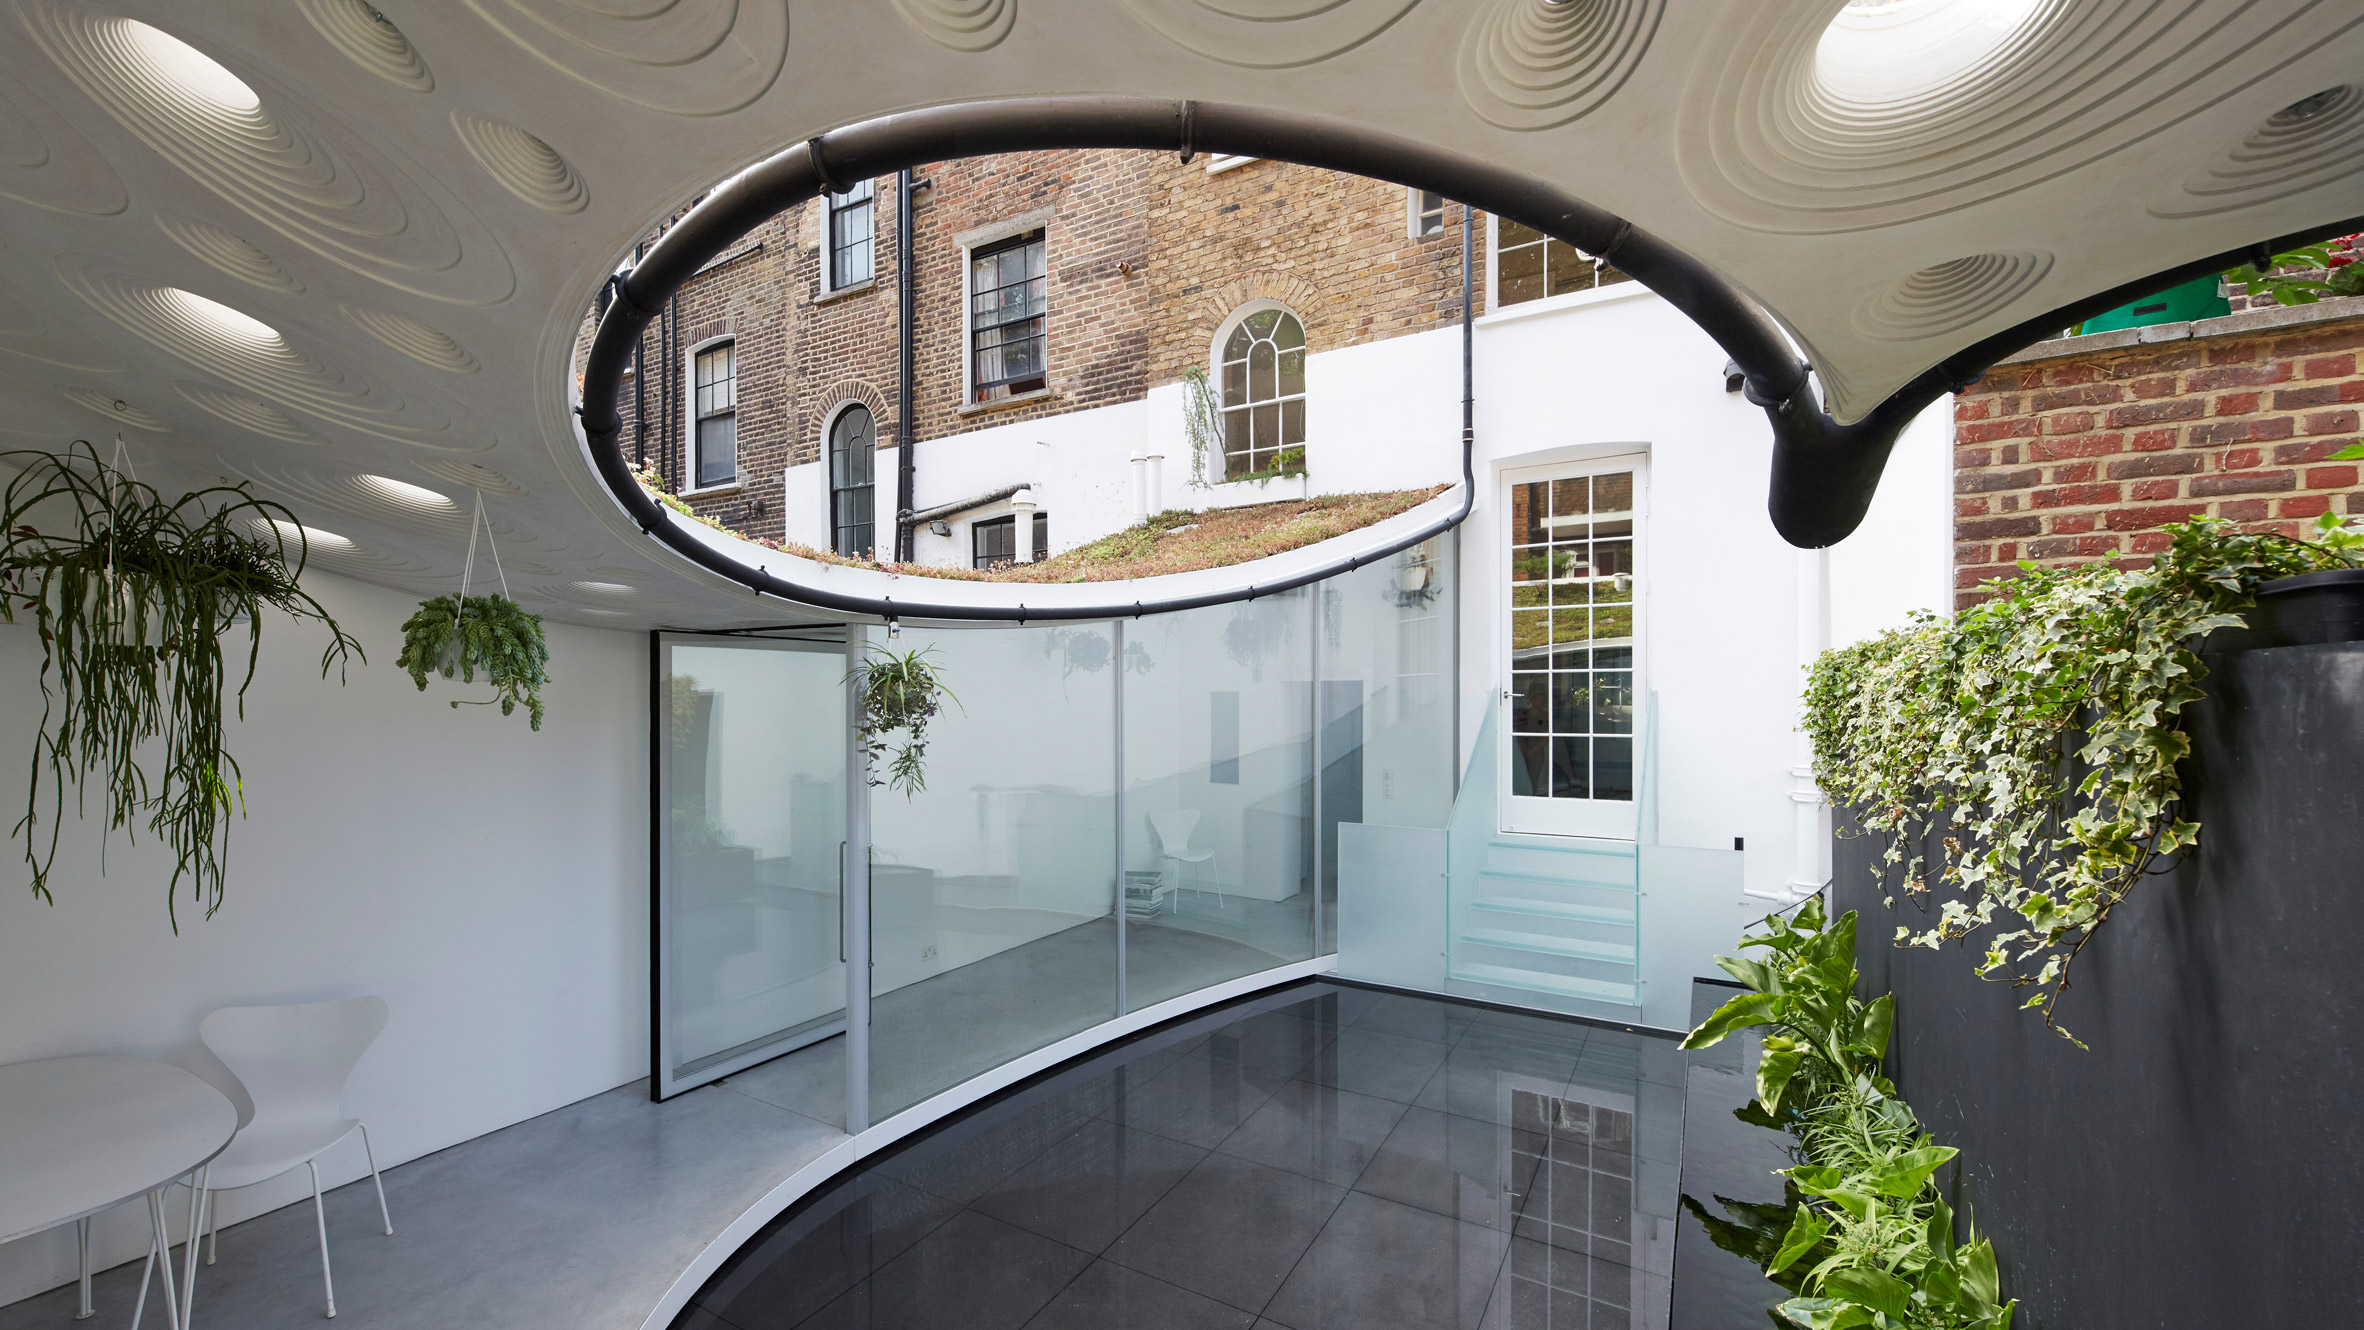 This week, Design of the Year and London's best house extension were announced